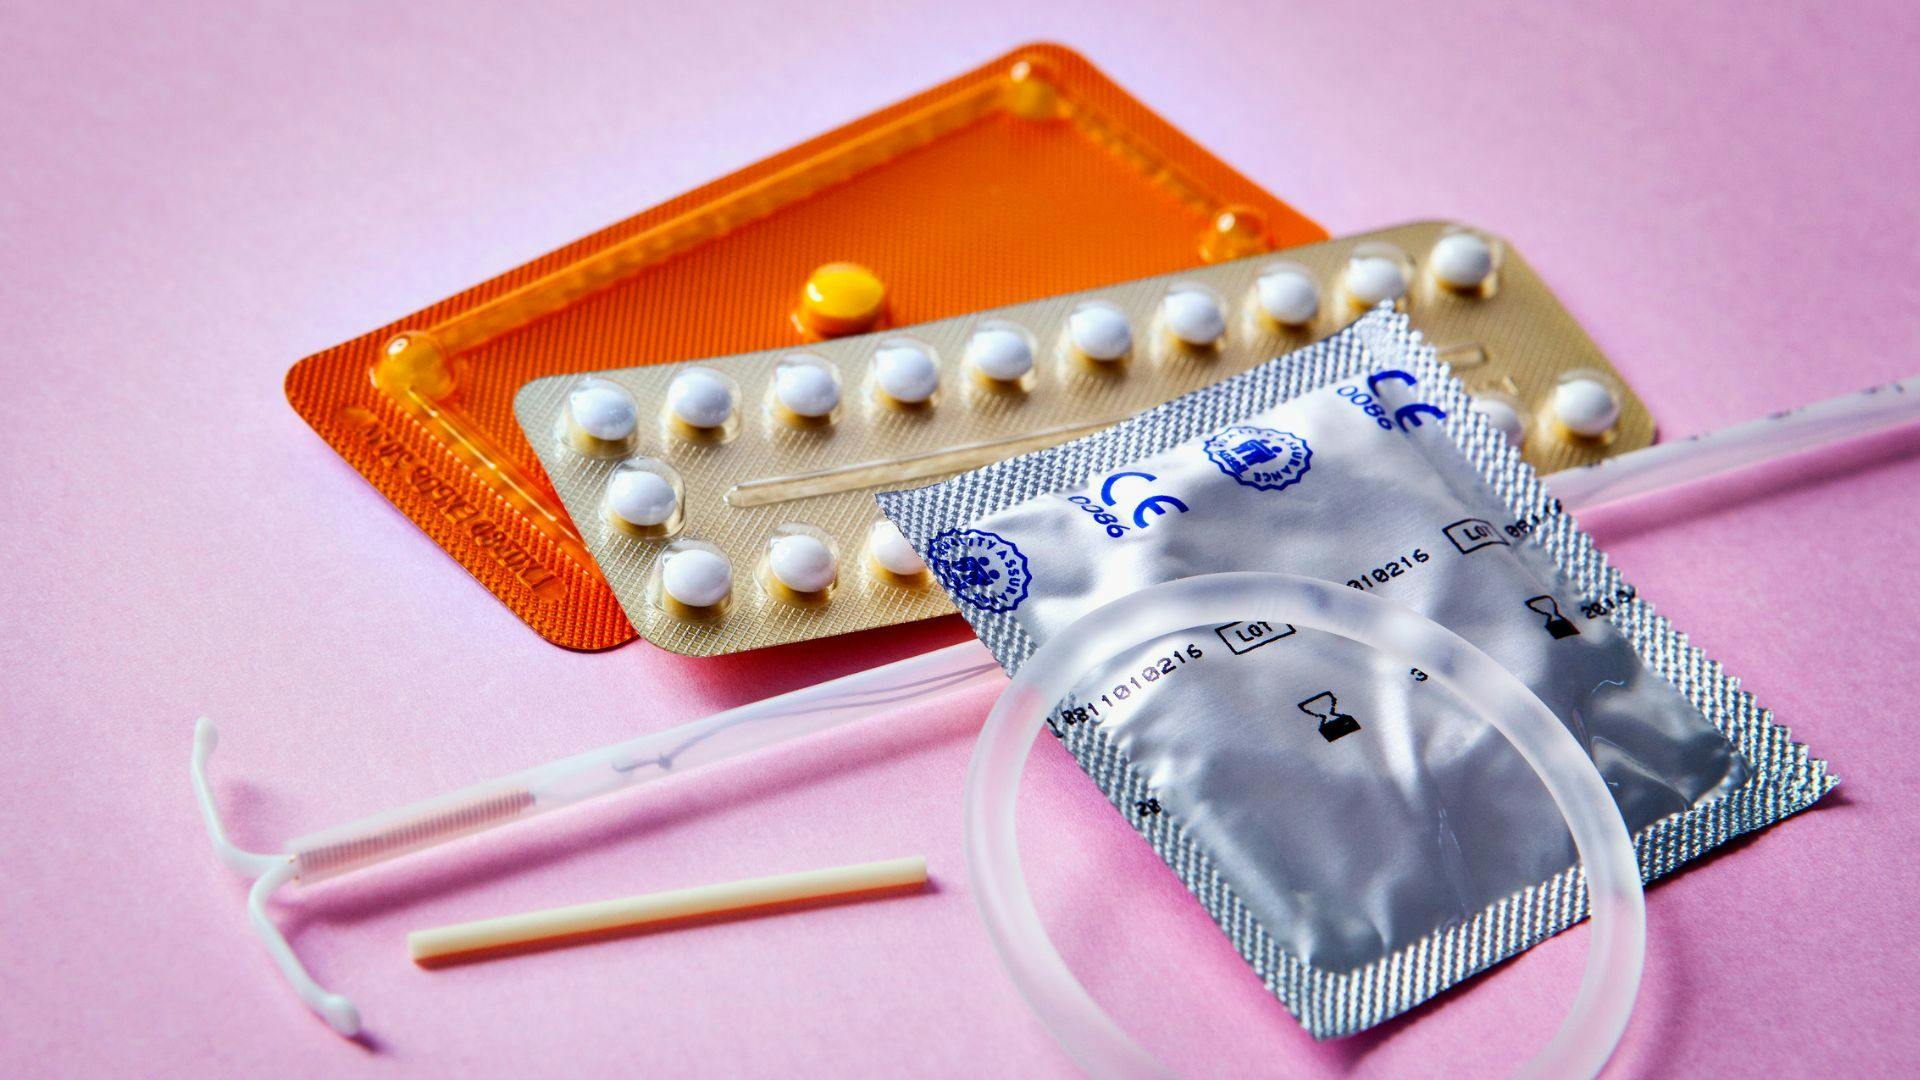 birth control - there are many different types of contraceptives on a pink surface